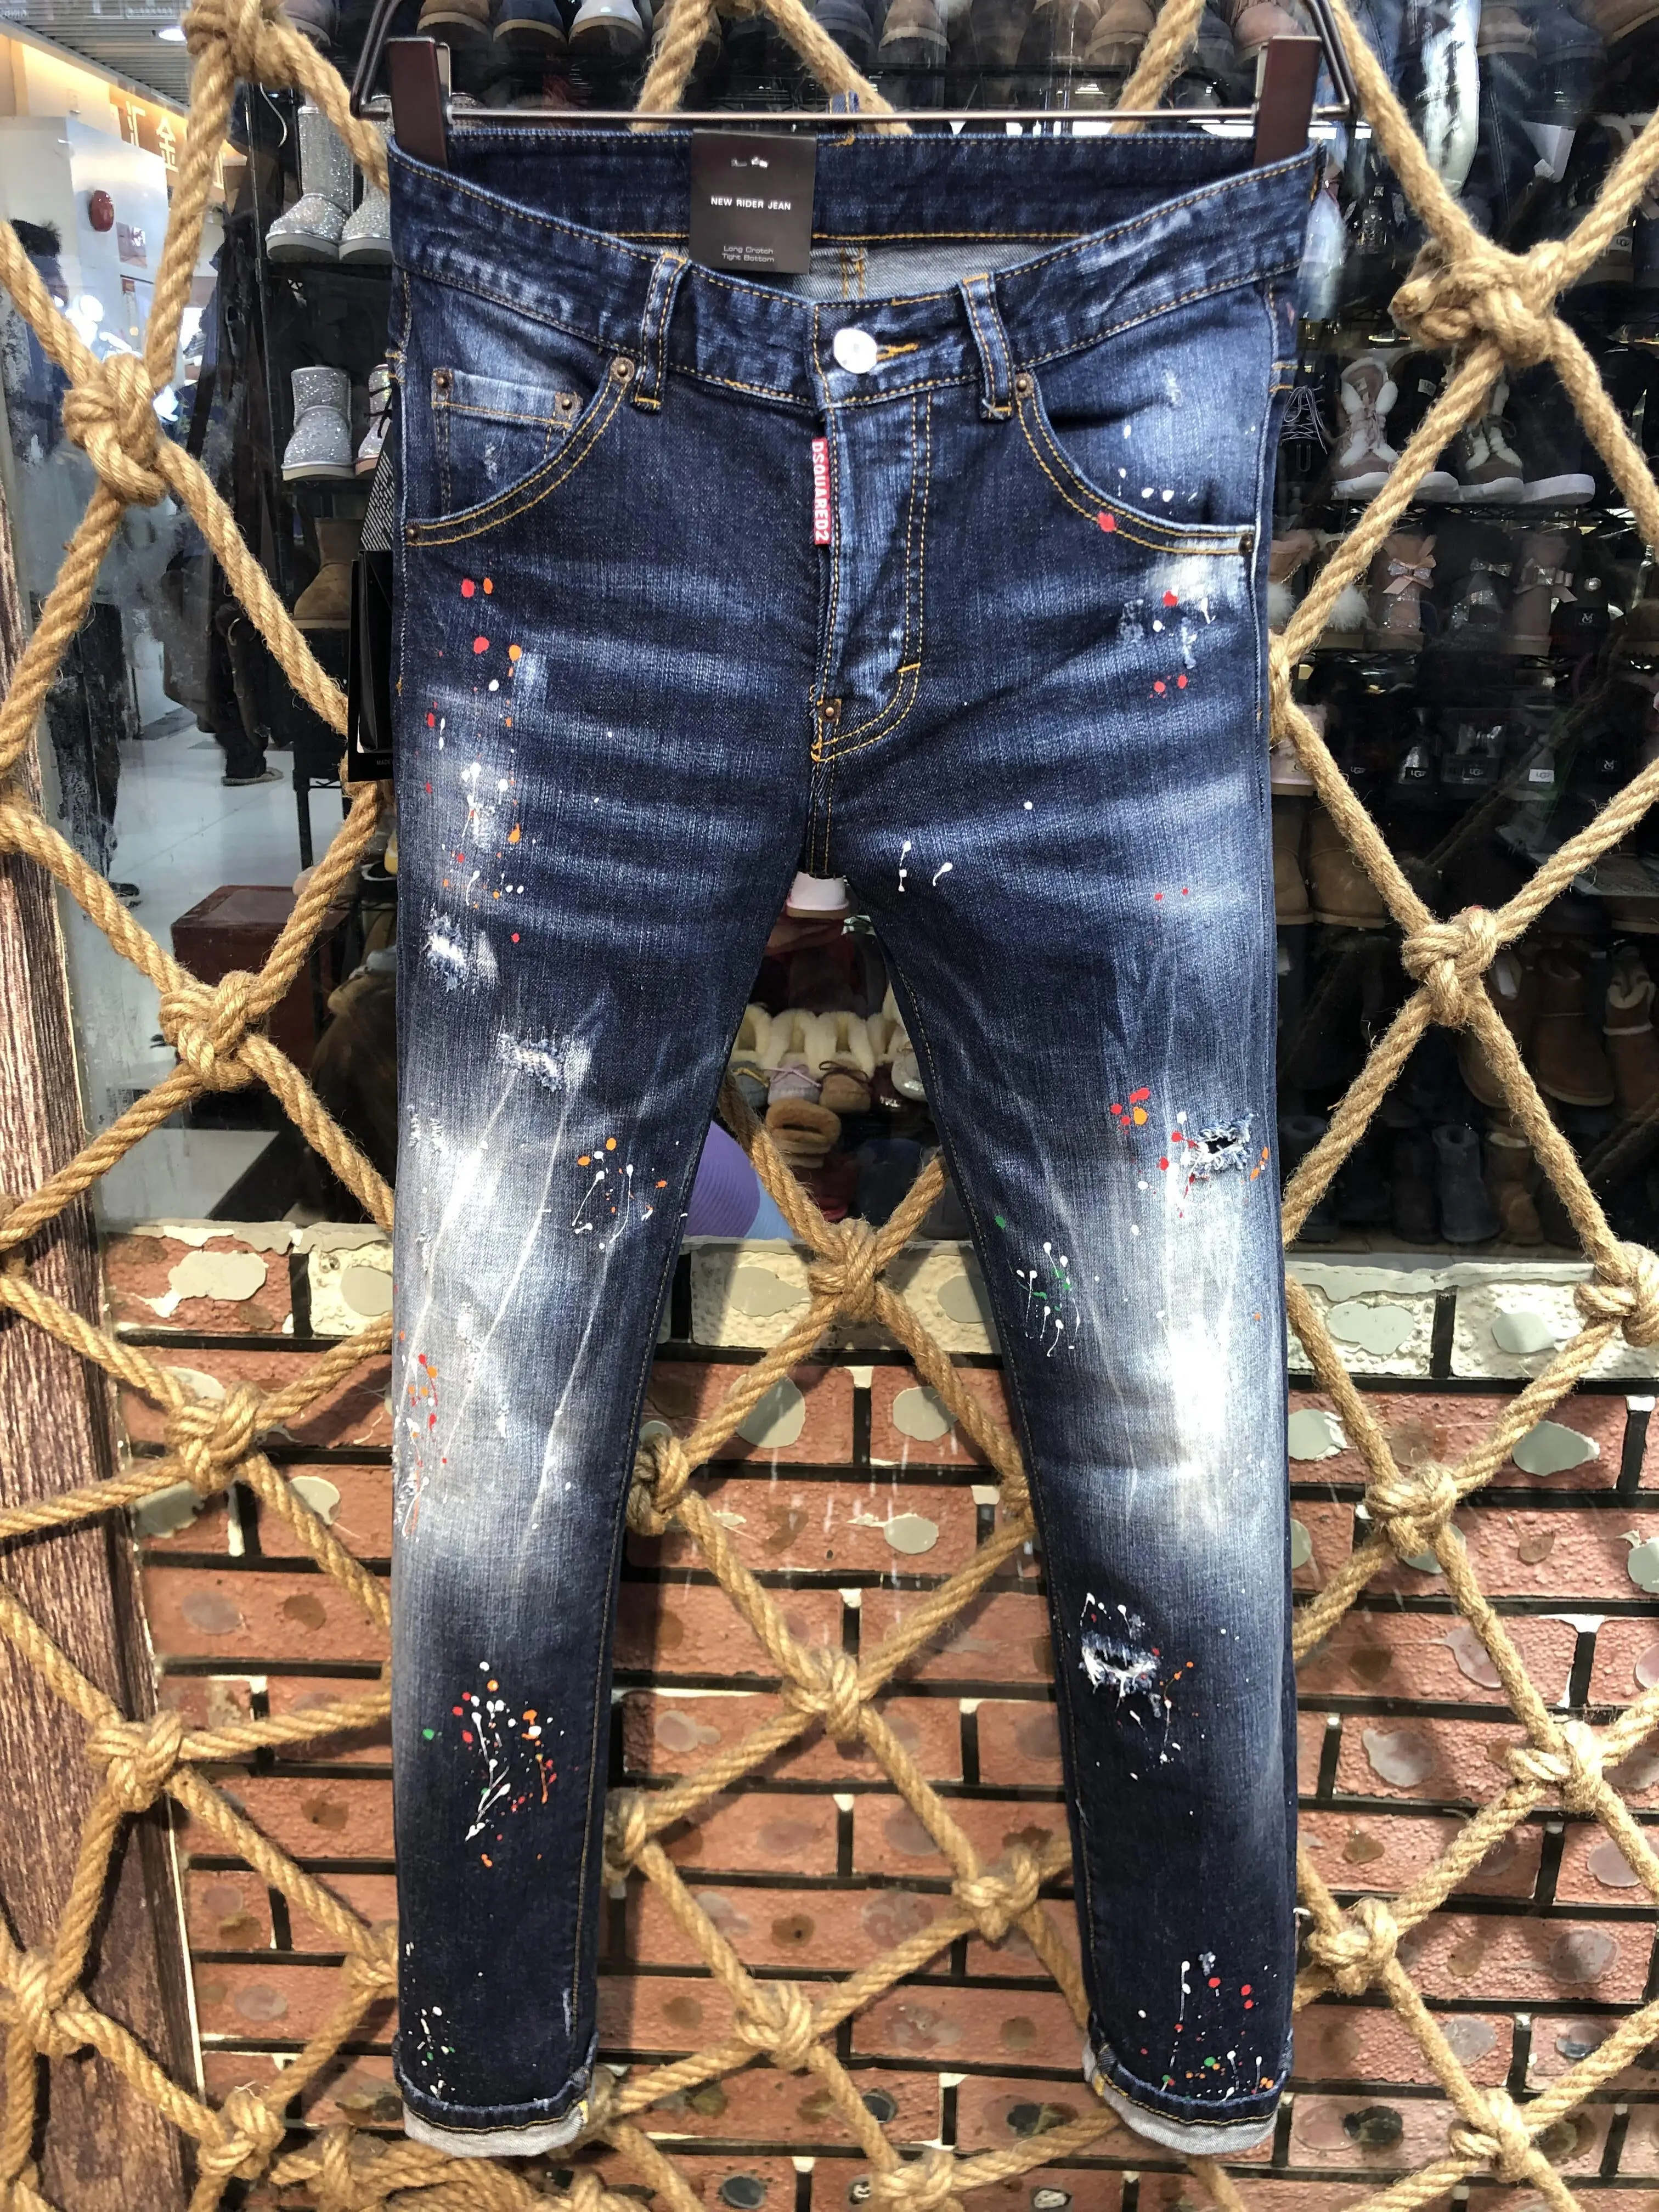 

D2 Vintage Couple Ripped Jeans Dsquared2 Fashion Splatter Printed Jeans Boyfriend Gift Distressed Streetwear Sizes44-48 54 9505